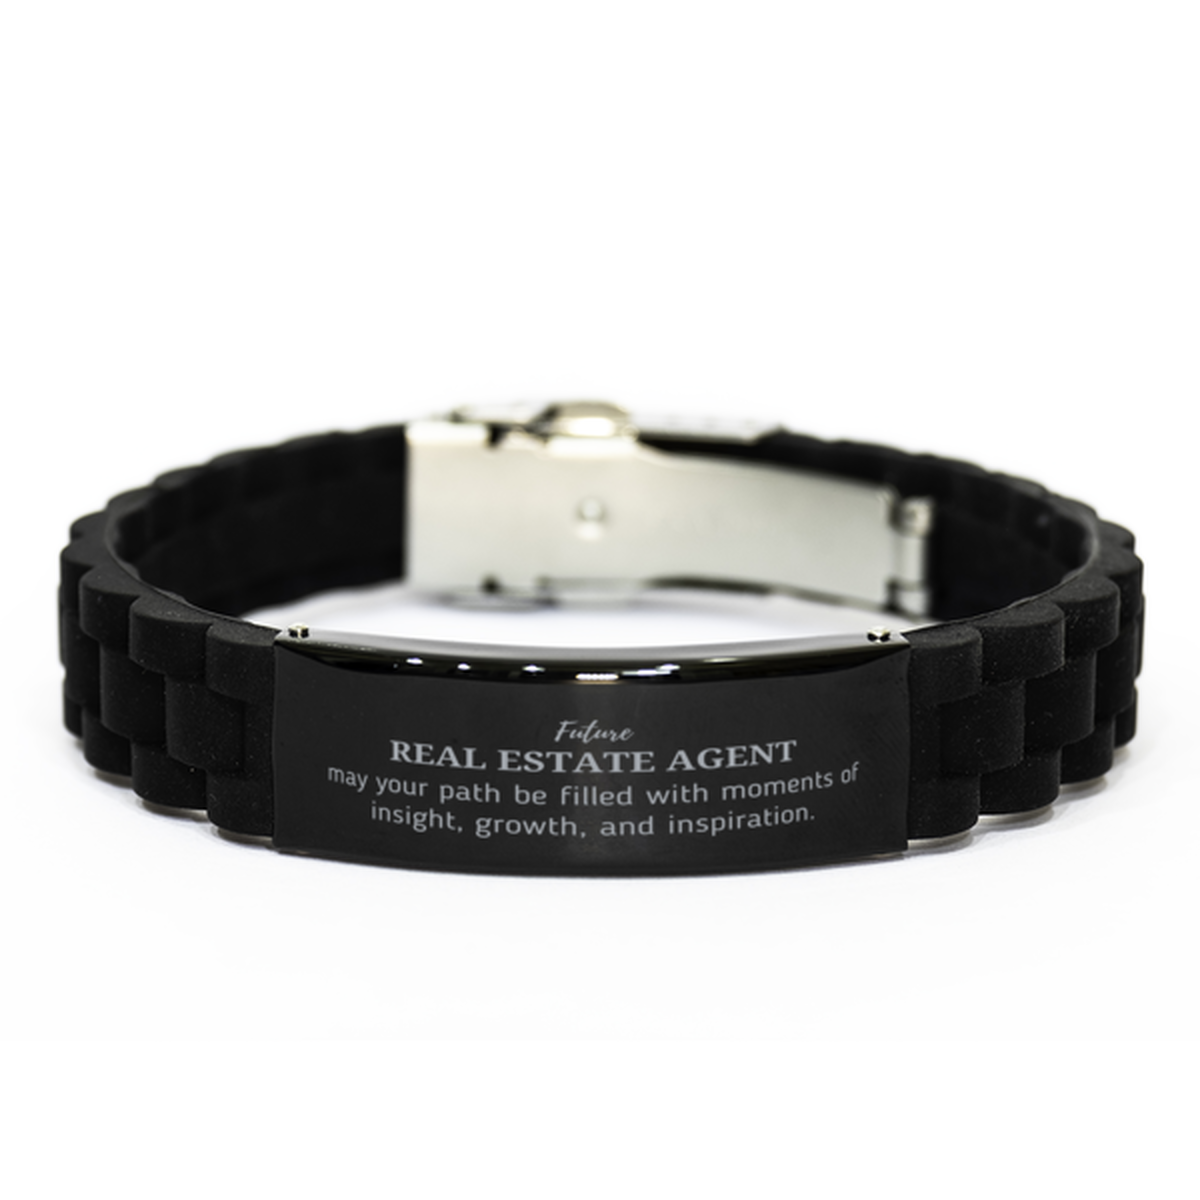 Future Real Estate Agent Gifts, May your path be filled with moments of insight, Graduation Gifts for New Real Estate Agent, Christmas Unique Black Glidelock Clasp Bracelet For Men, Women, Friends